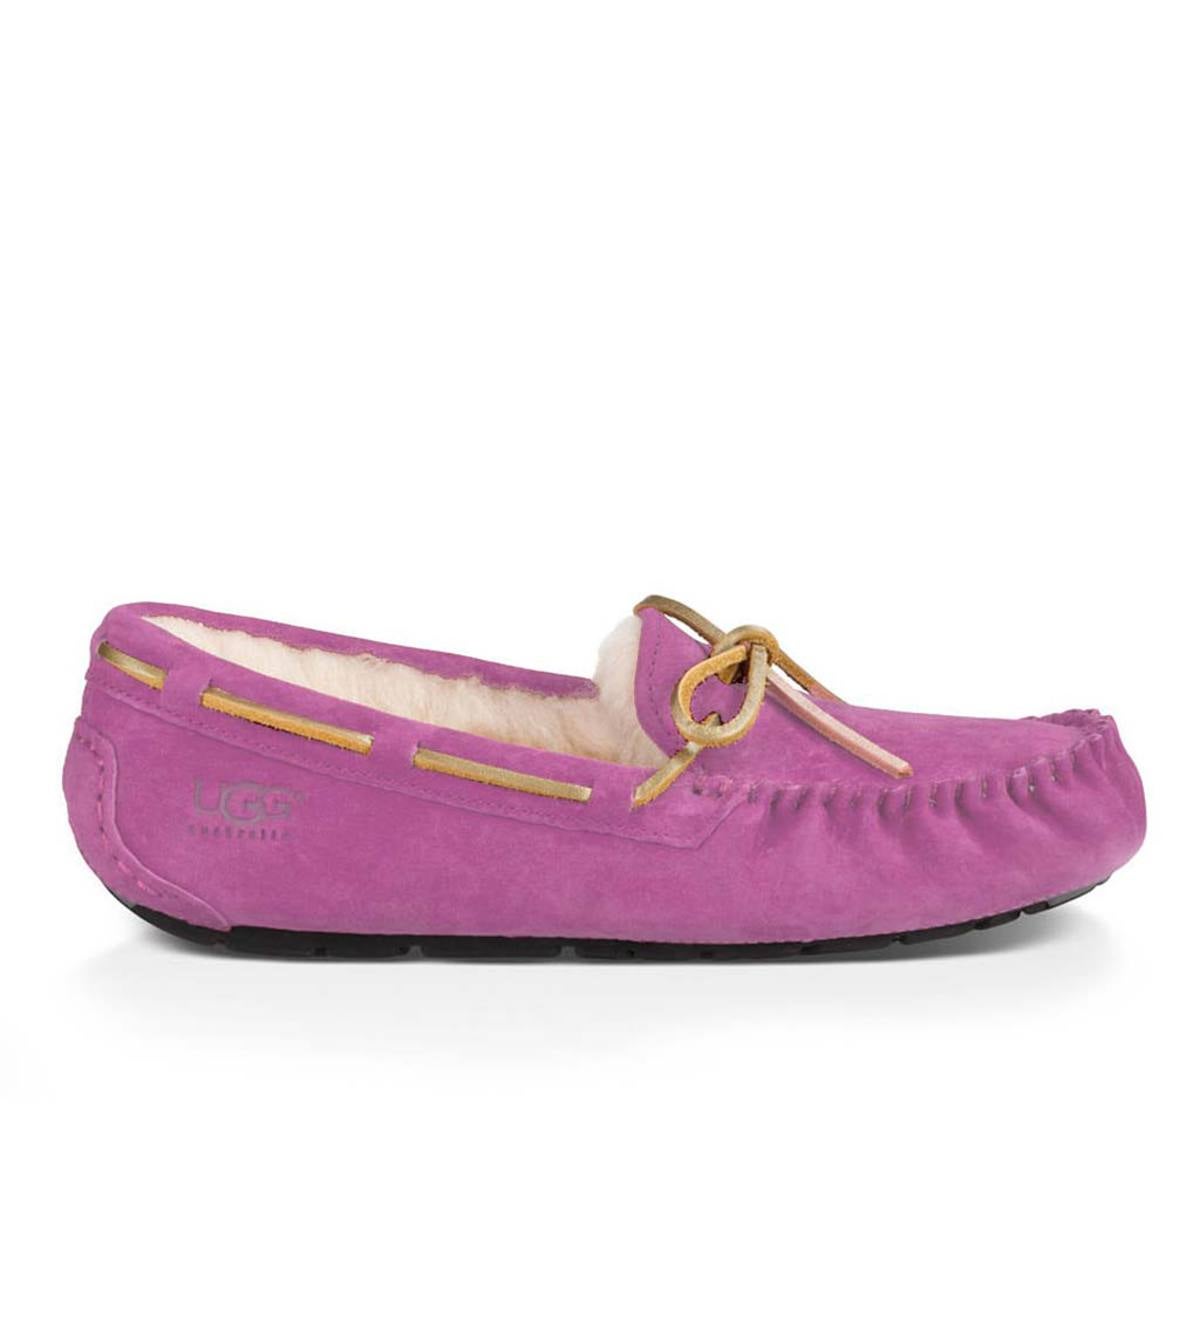 UGG Ansley Moccasin Slippers - Bodacious - Size 10